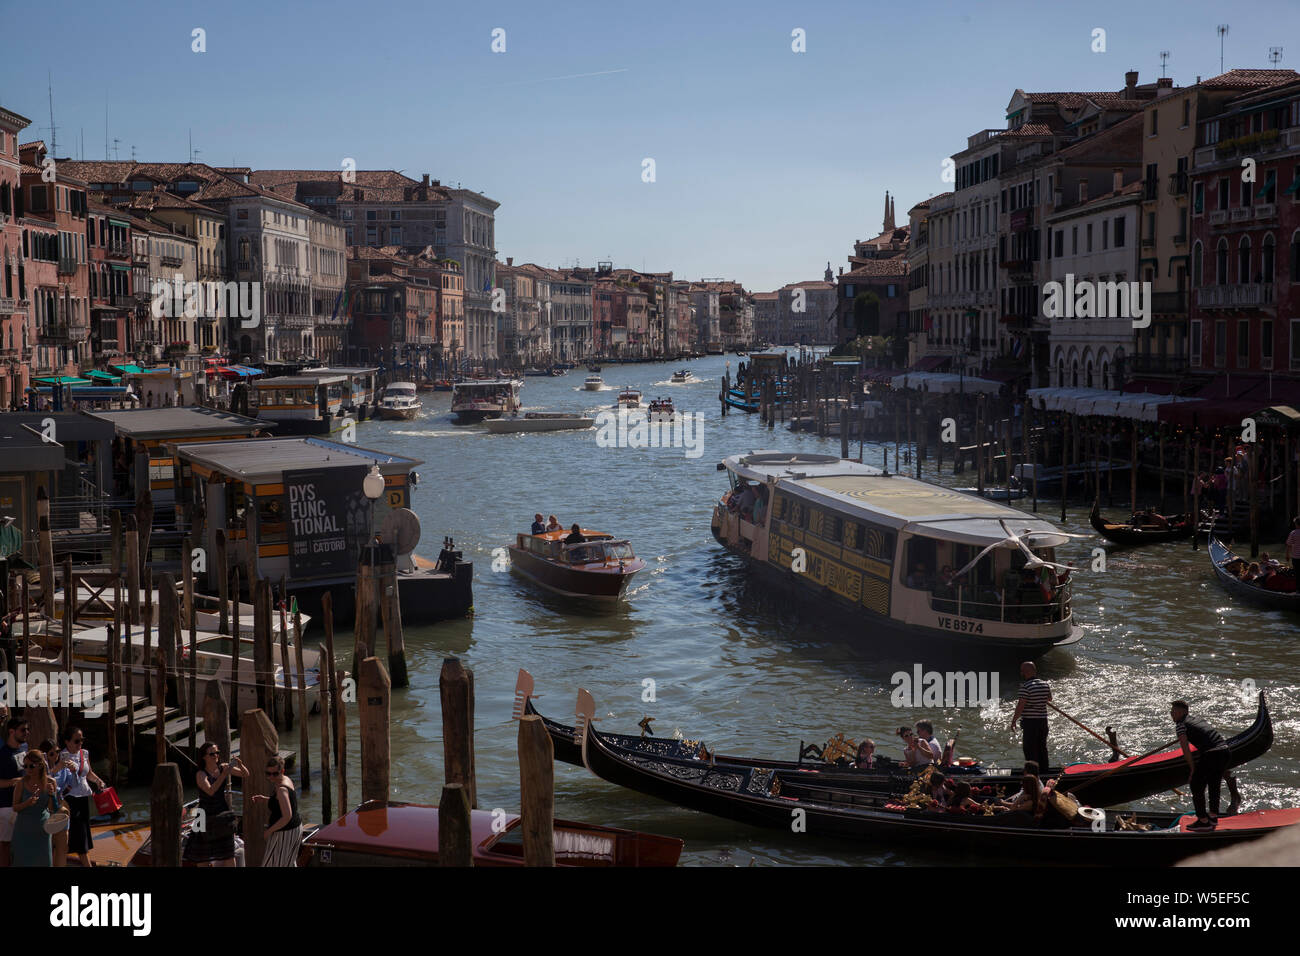 Busy boat traffic and crowded tourism In beautiful ancient city of Venice in Italy. Stock Photo